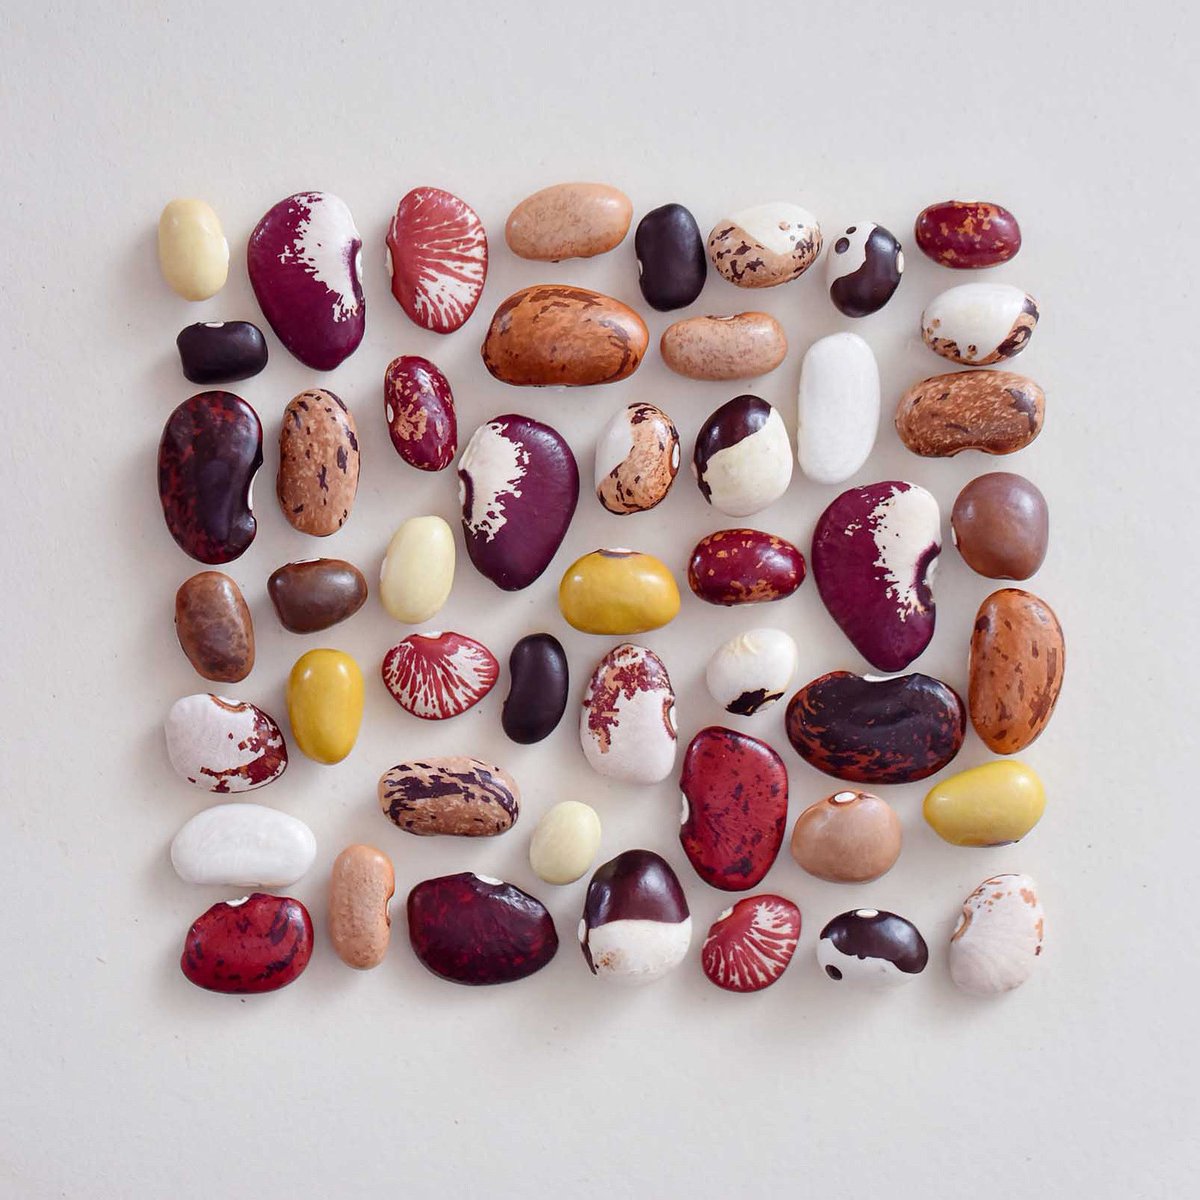 The beauty of bean biodiversity. Cultivars of phaseolus and vigna.